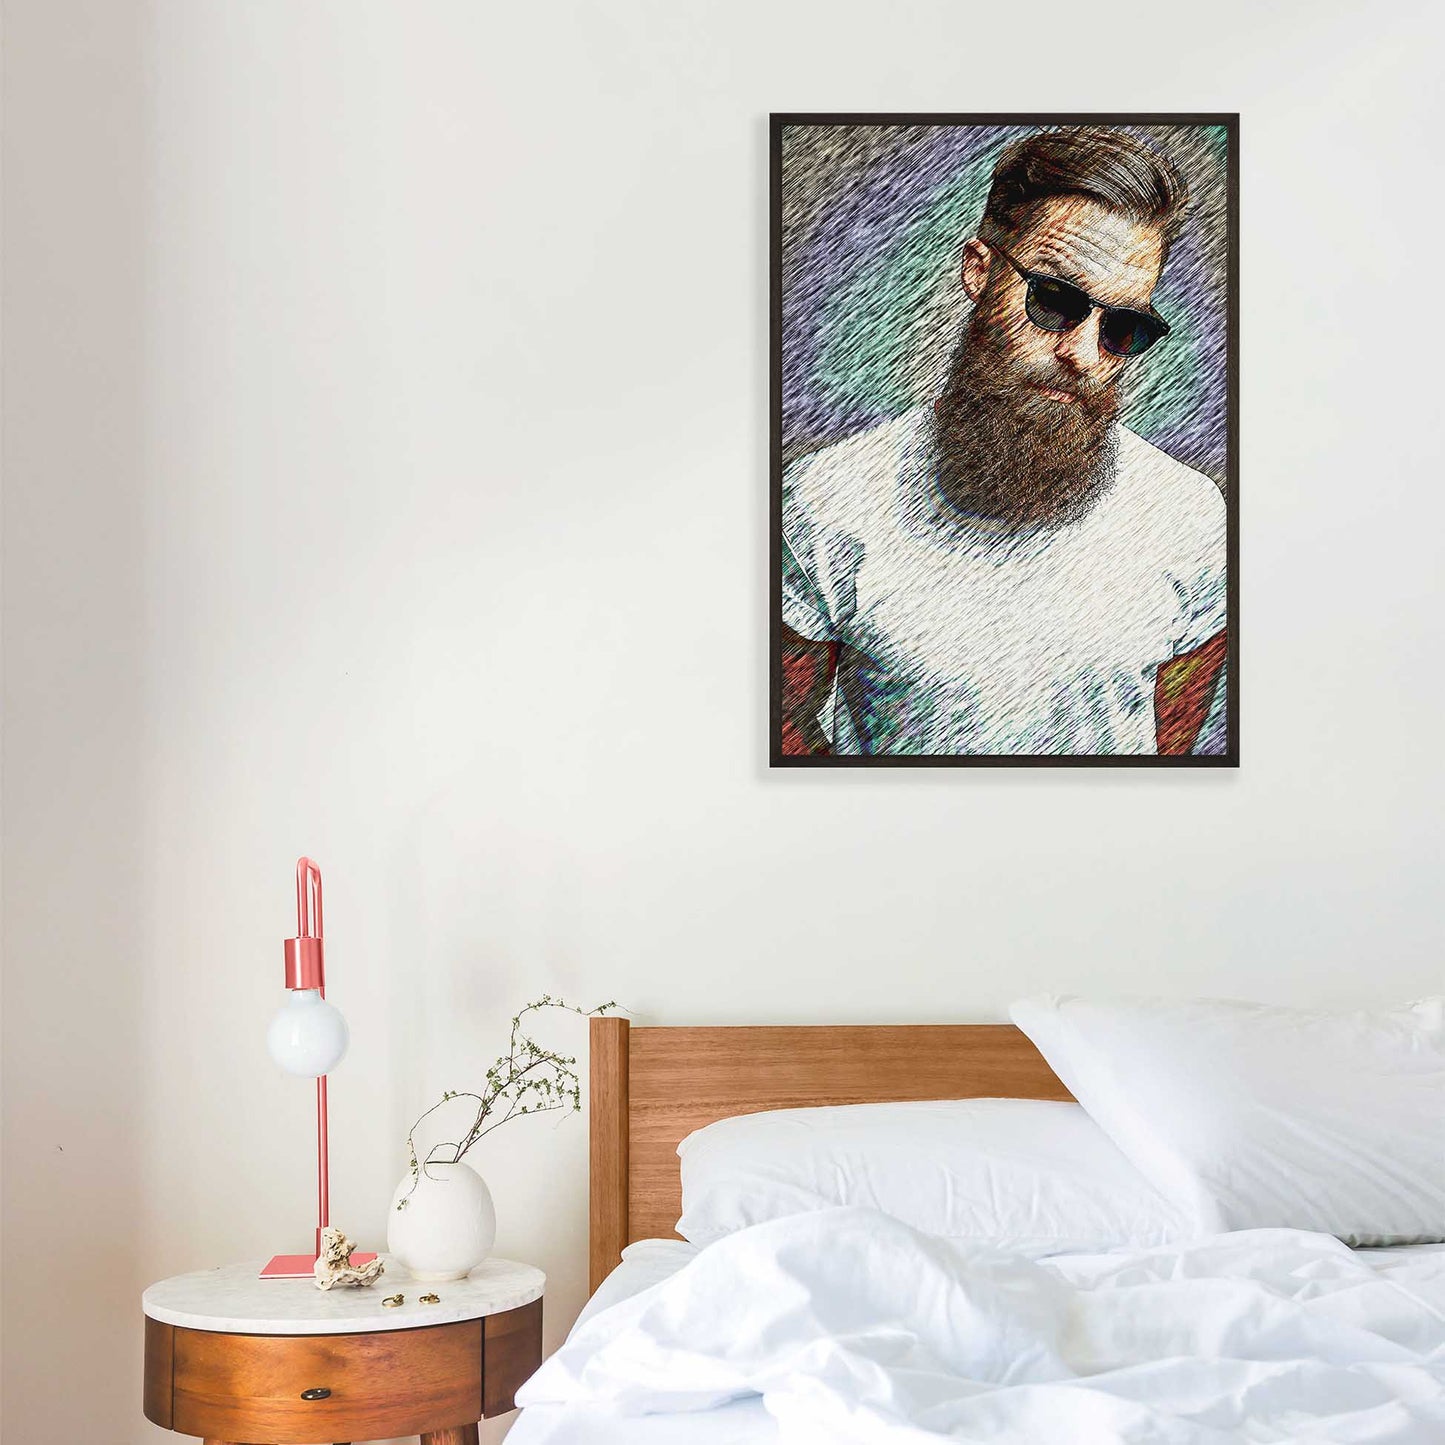 Elevate your interior with our Personalised Artsy Illustration Framed Print. Crafted from a photo, this stunning artwork is printed on museum-quality paper, capturing the essence of fine art. Encased in a natural wood frame